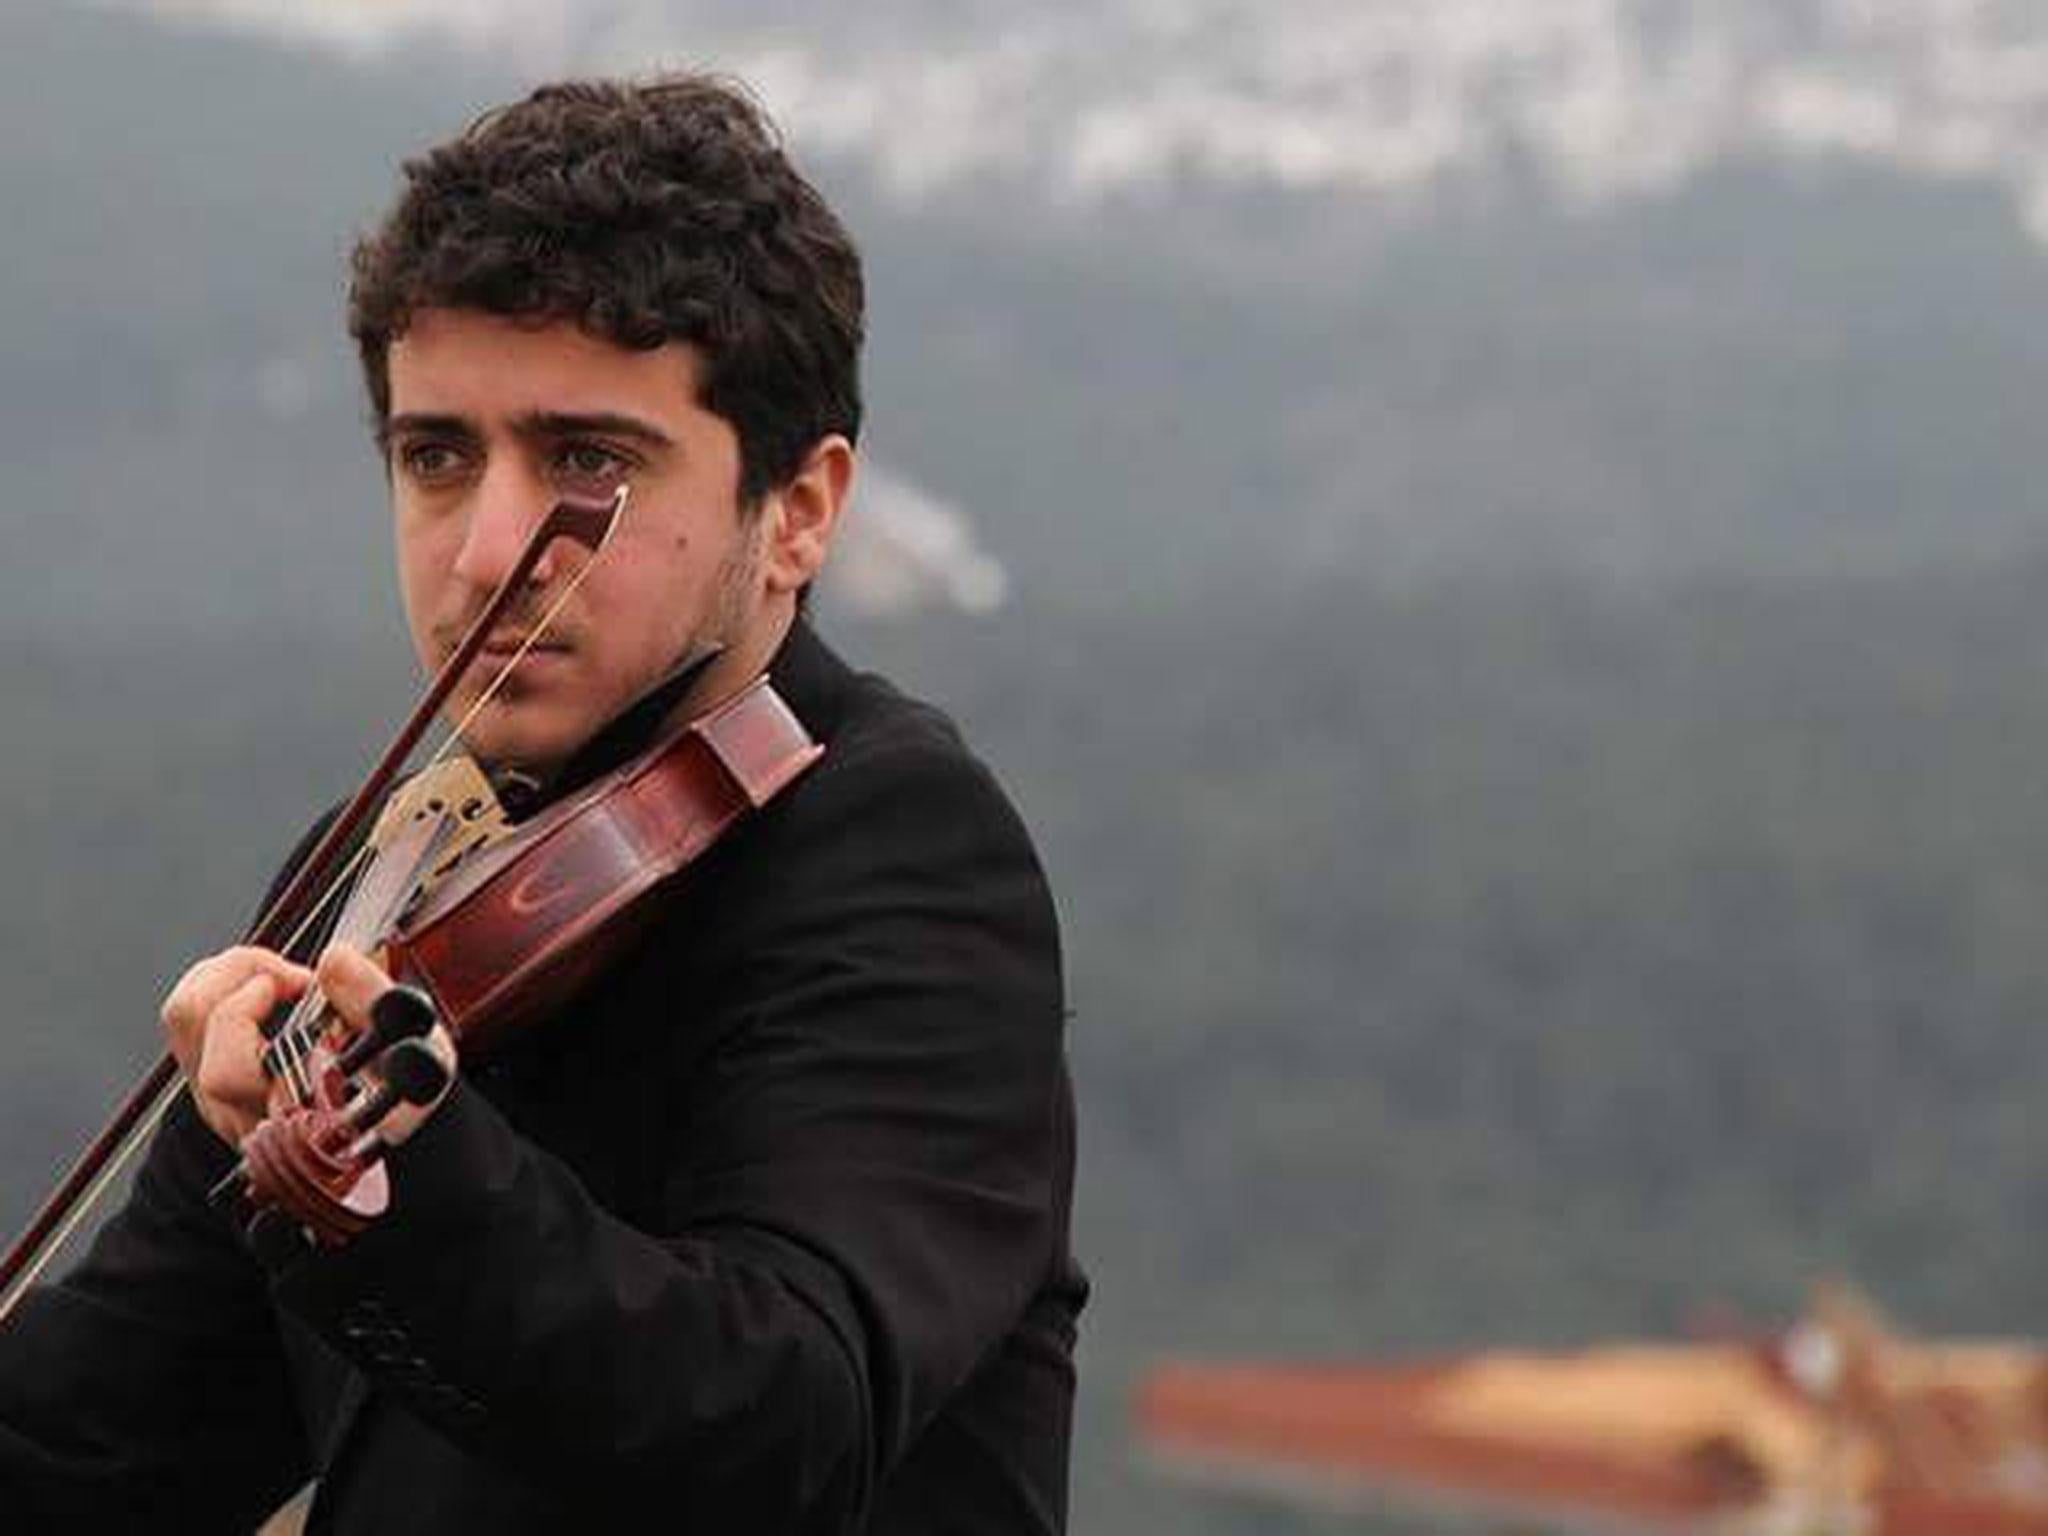 Baris was troubled in his teenage years before finding a sense of purpose in his passion for the violin